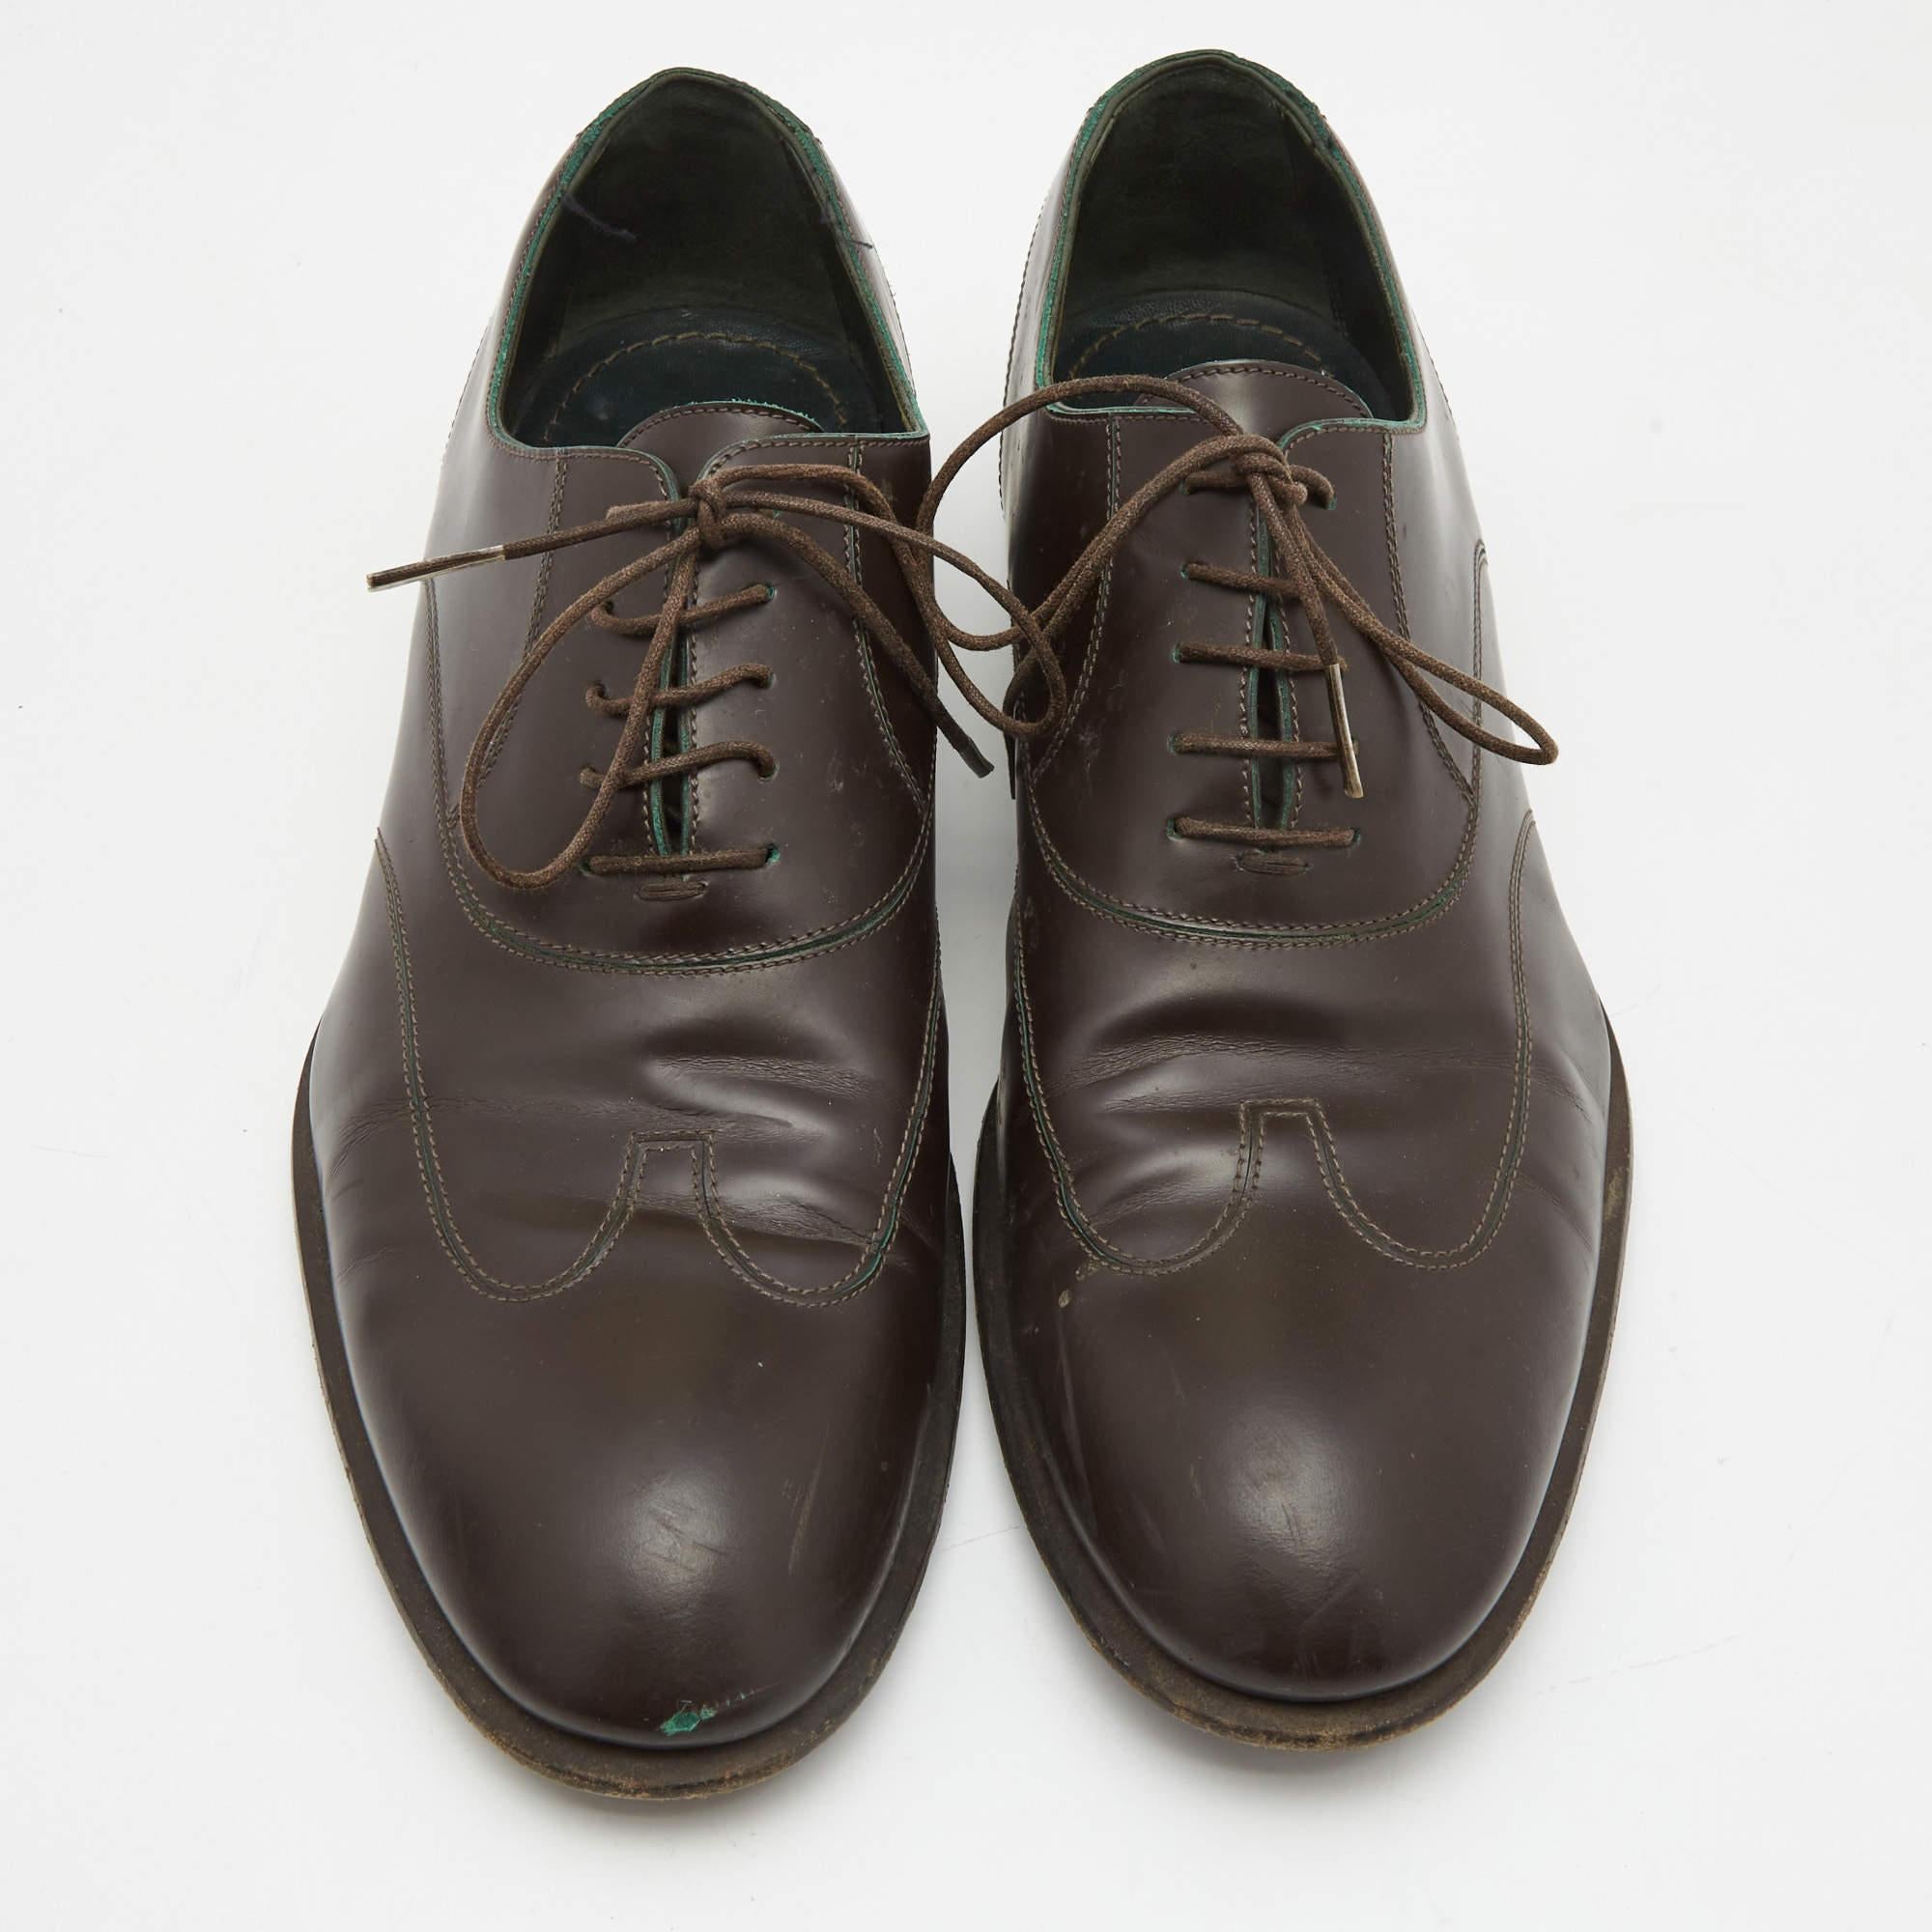 These well-crafted designer shoes have got you covered for office and weekend plans. They are by Lous Vuitton, fashioned in dark brown leather, and secured with laces.

